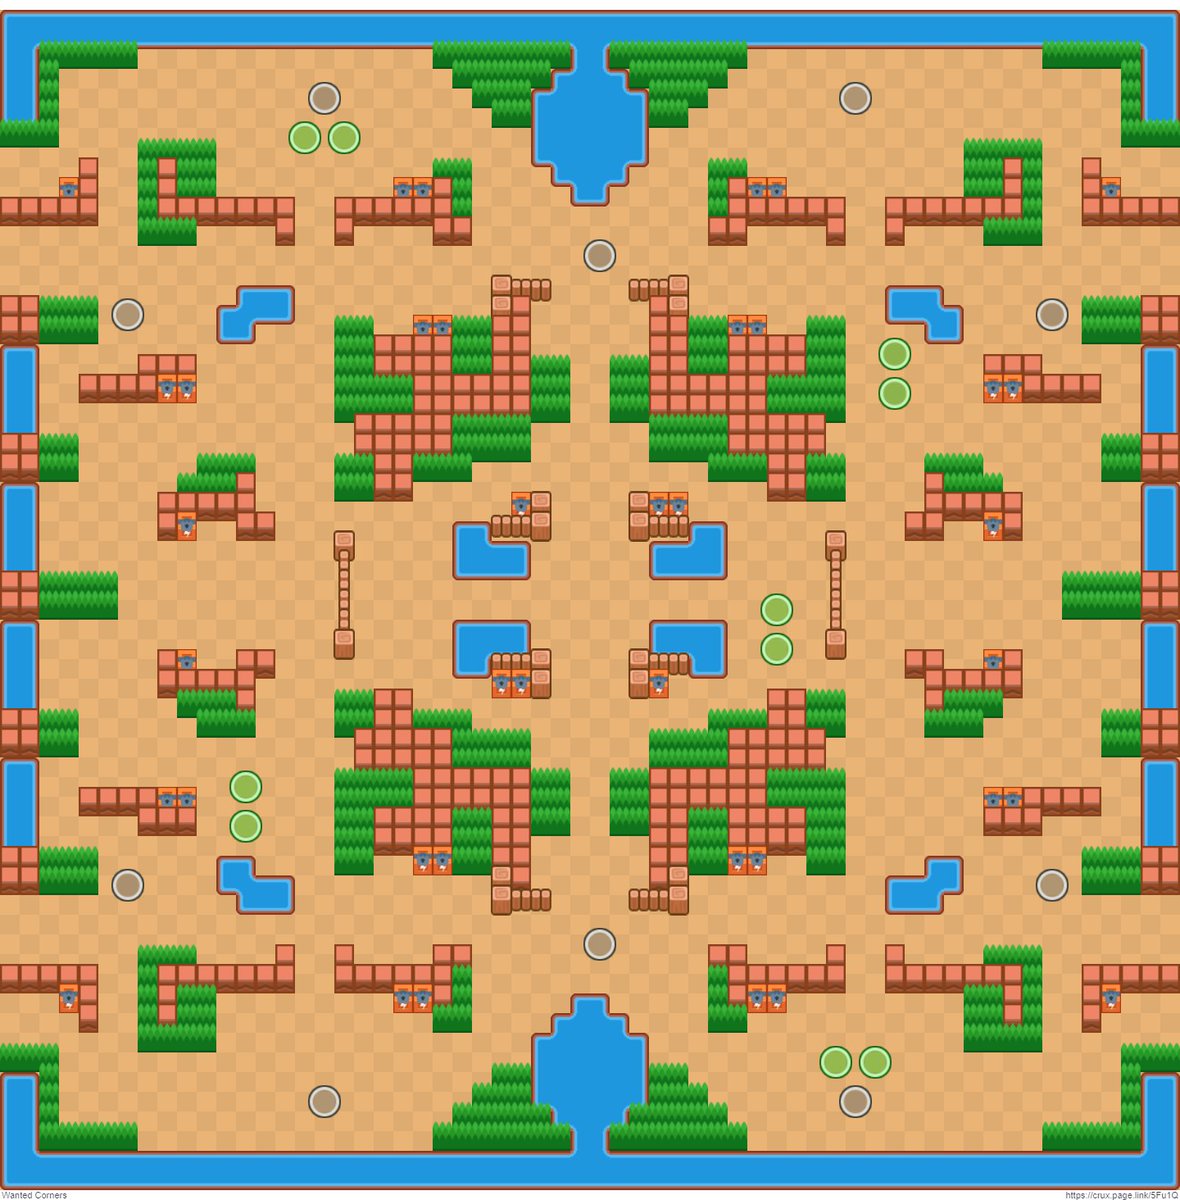 Moneycapital On Twitter My Showdown Map Wanted Corners I Love Showdown And This Is How I Would Create A Long Range Showdown Map Thoughts Brawlstars Frank Supercell I Would Love To Know Your - all showdown maps brawl stars